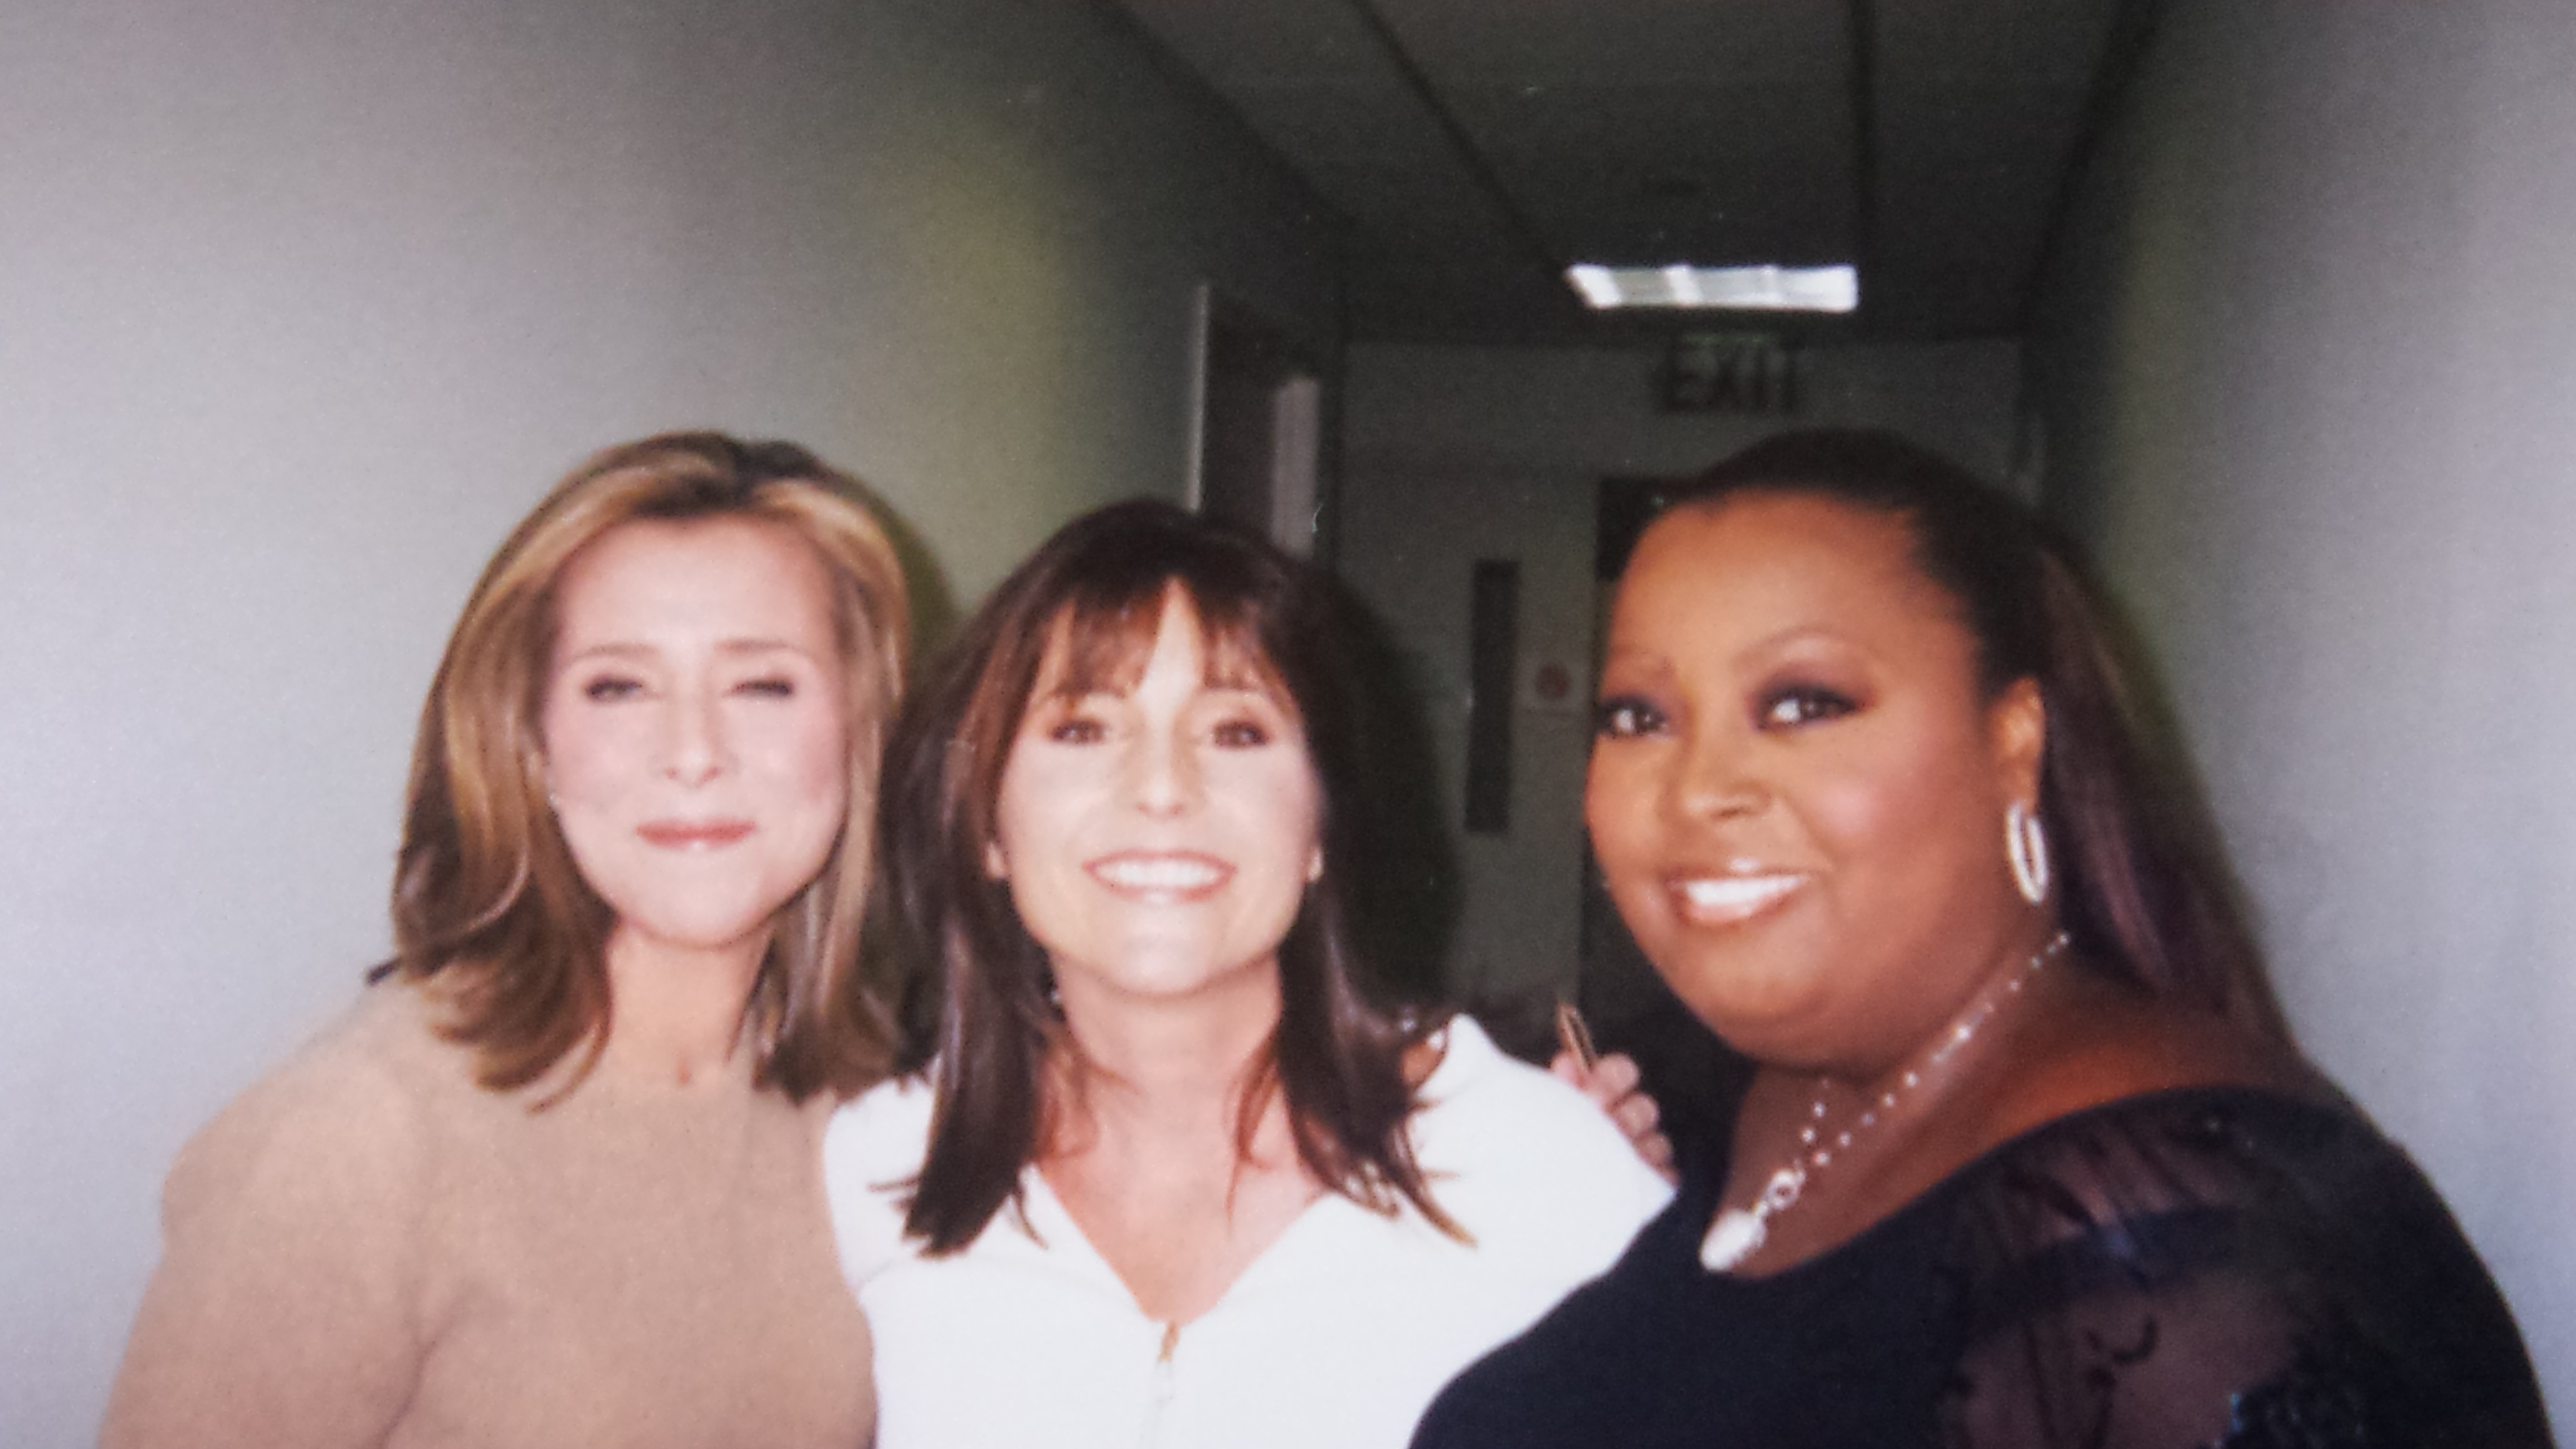 Co-hosting ABC's The View with Meredith Viera and Star Jones (2003)